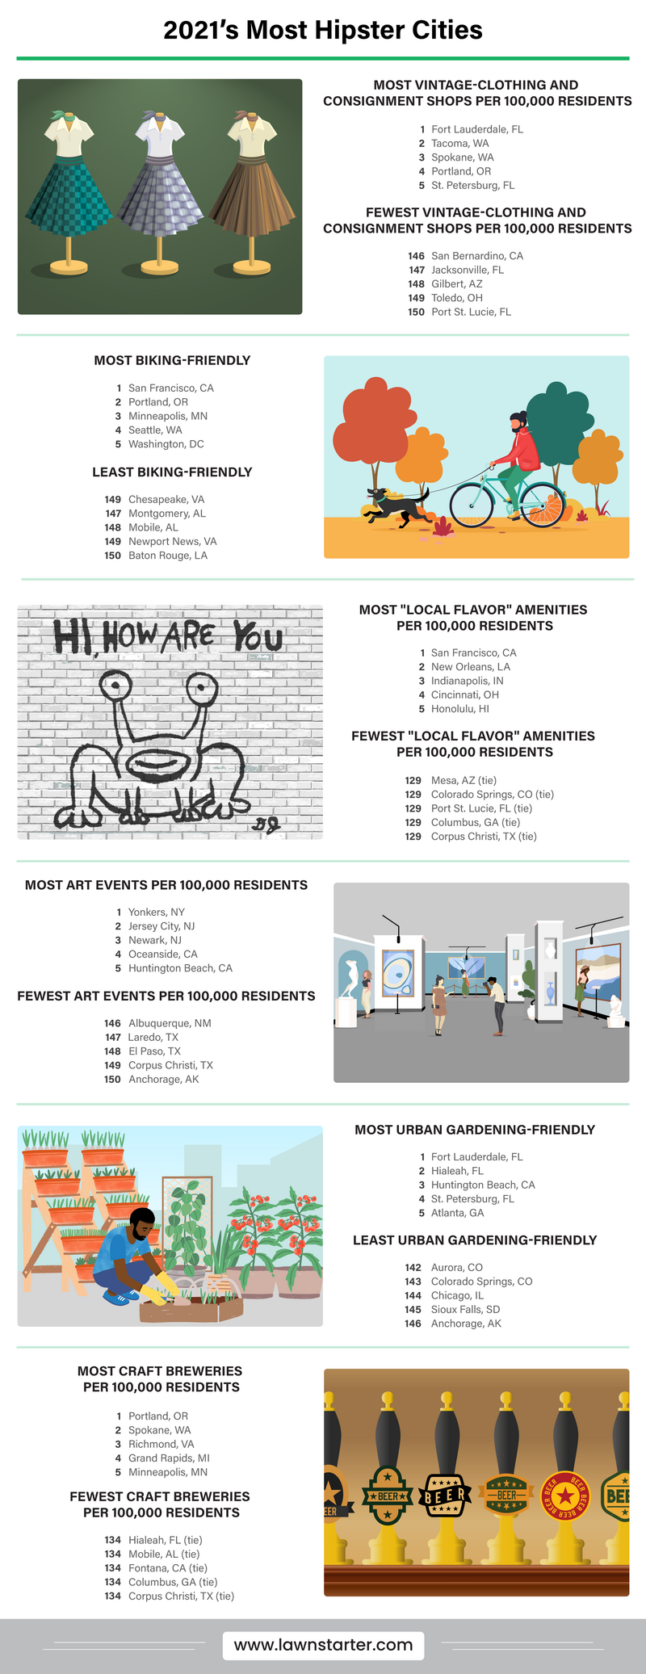 2021's Most Hipster Cities infographic